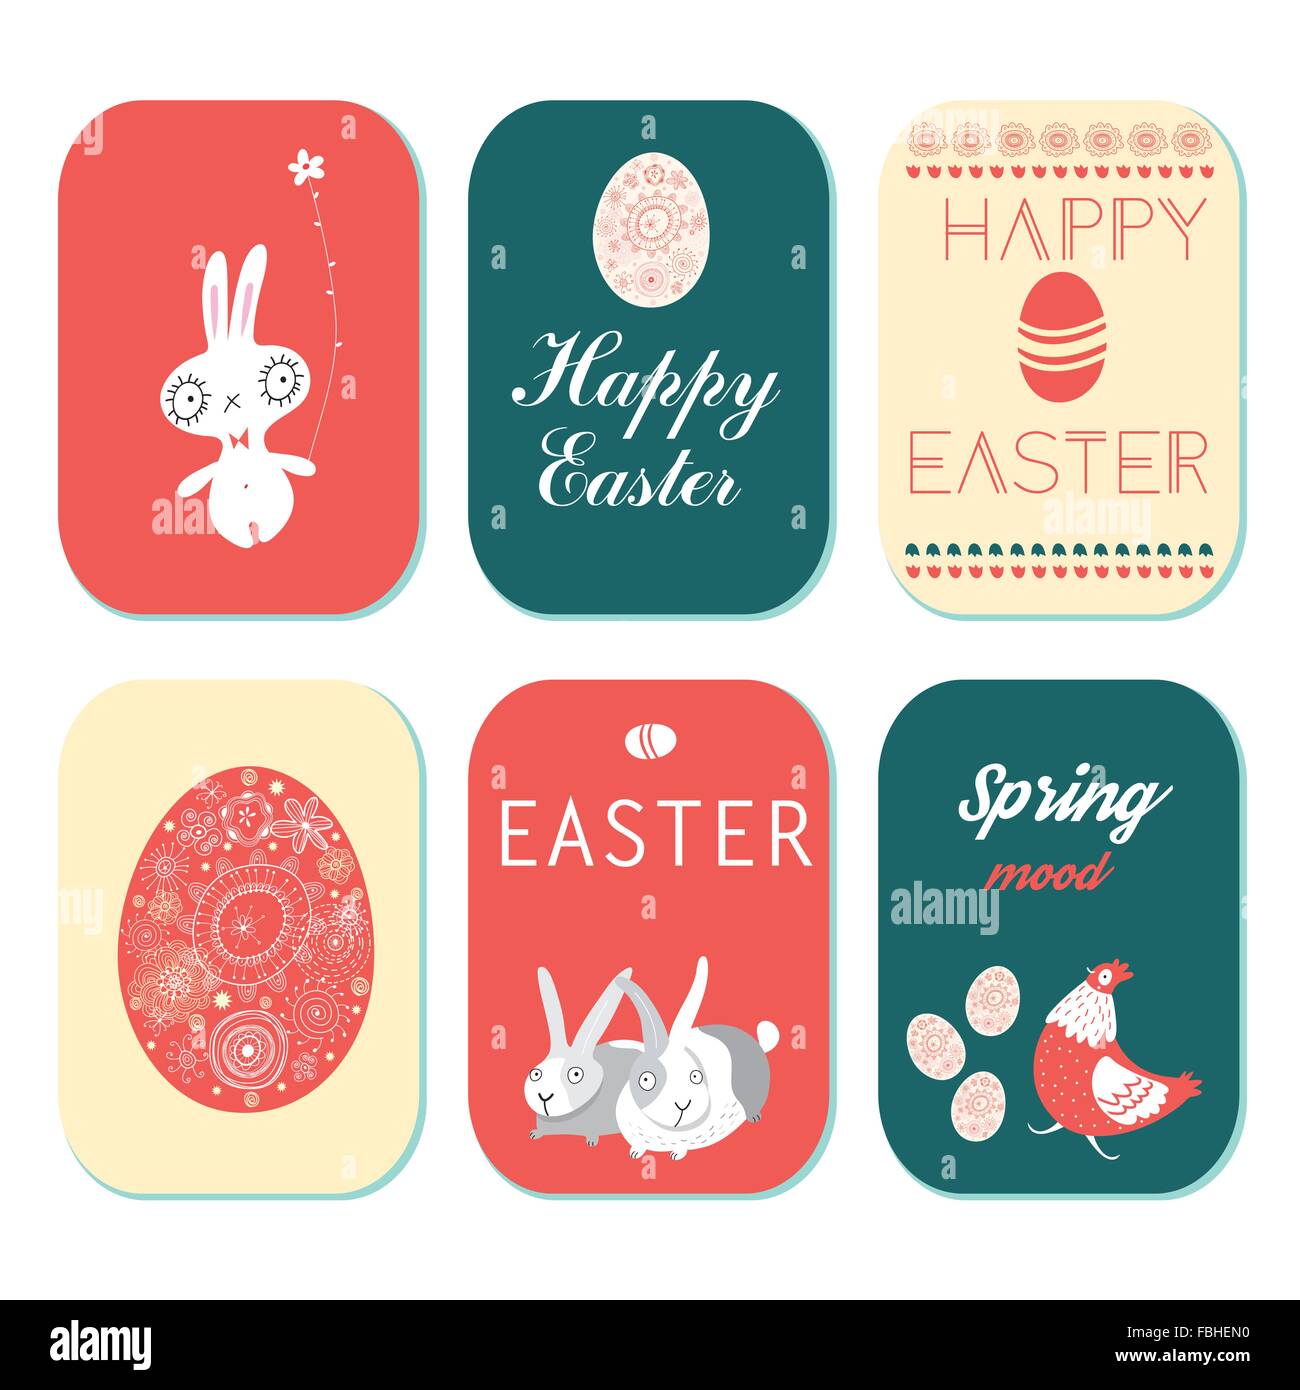 Holiday greeting cards set of 6 pieces to a happy Easter Stock Vector